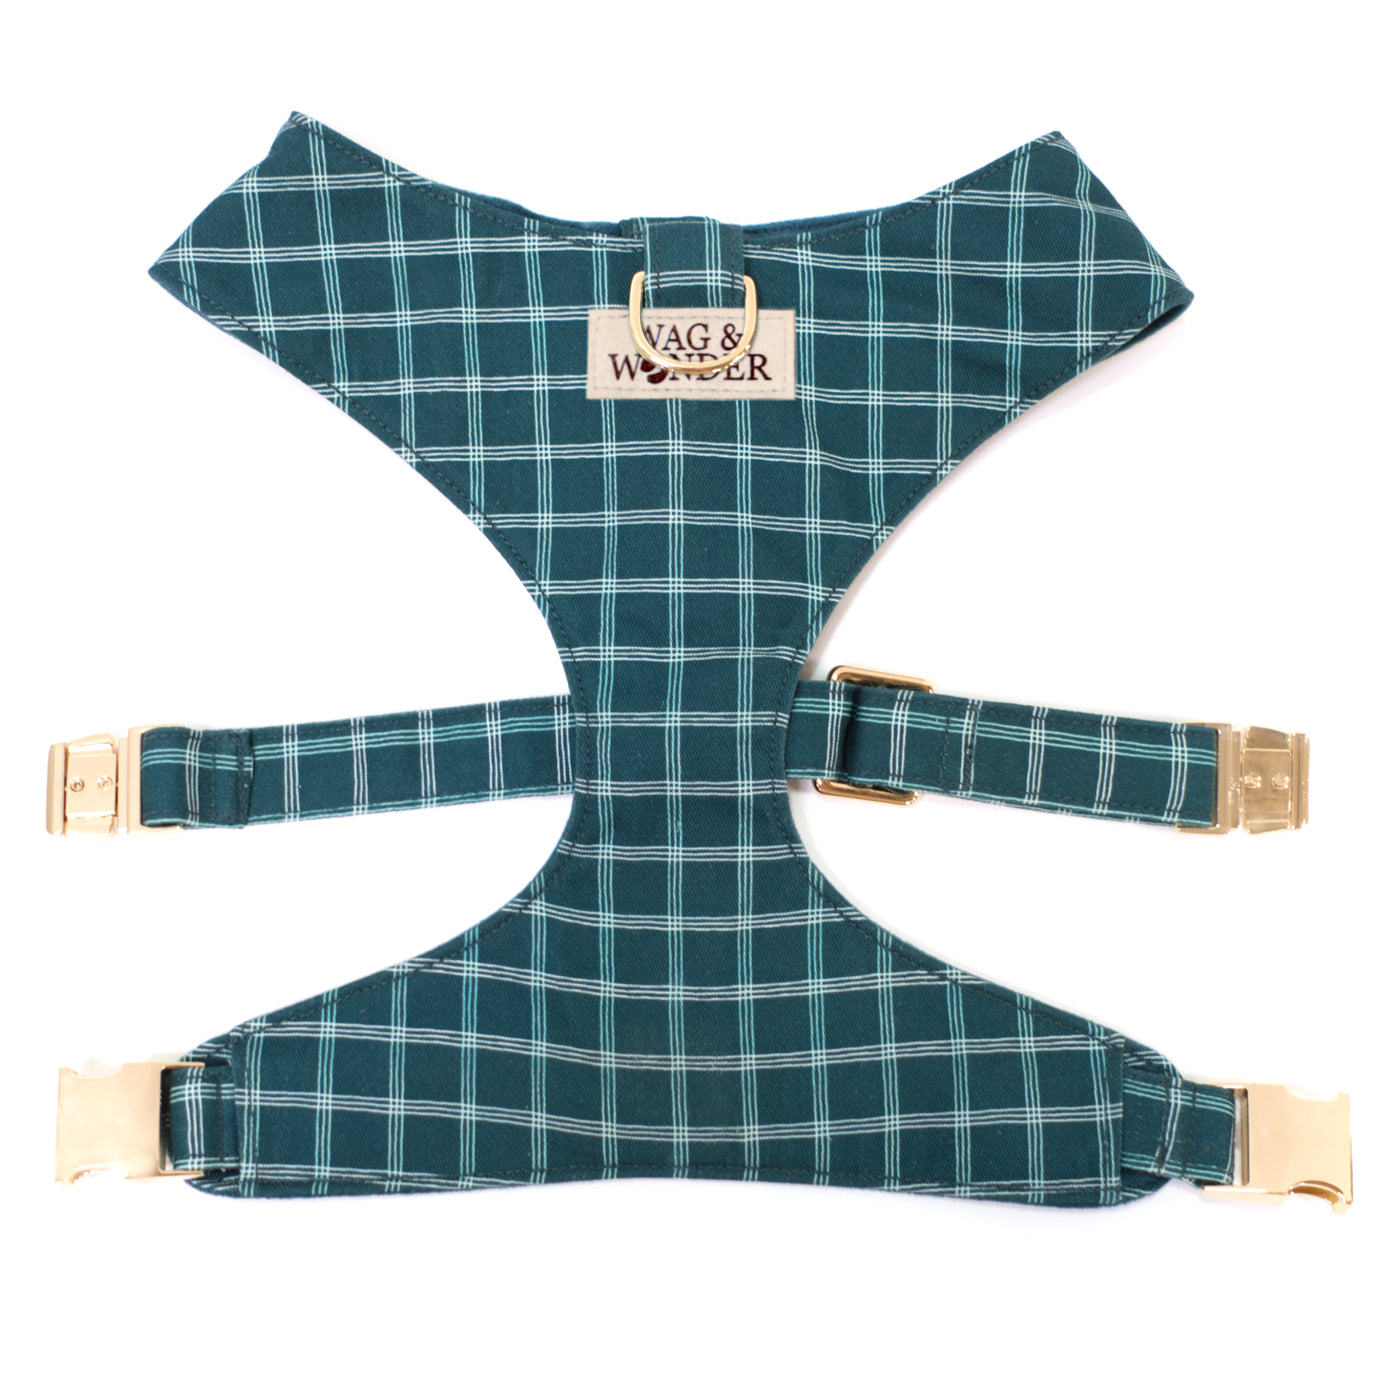 Teal windowpane plaid reversible dog harness with gold hardware